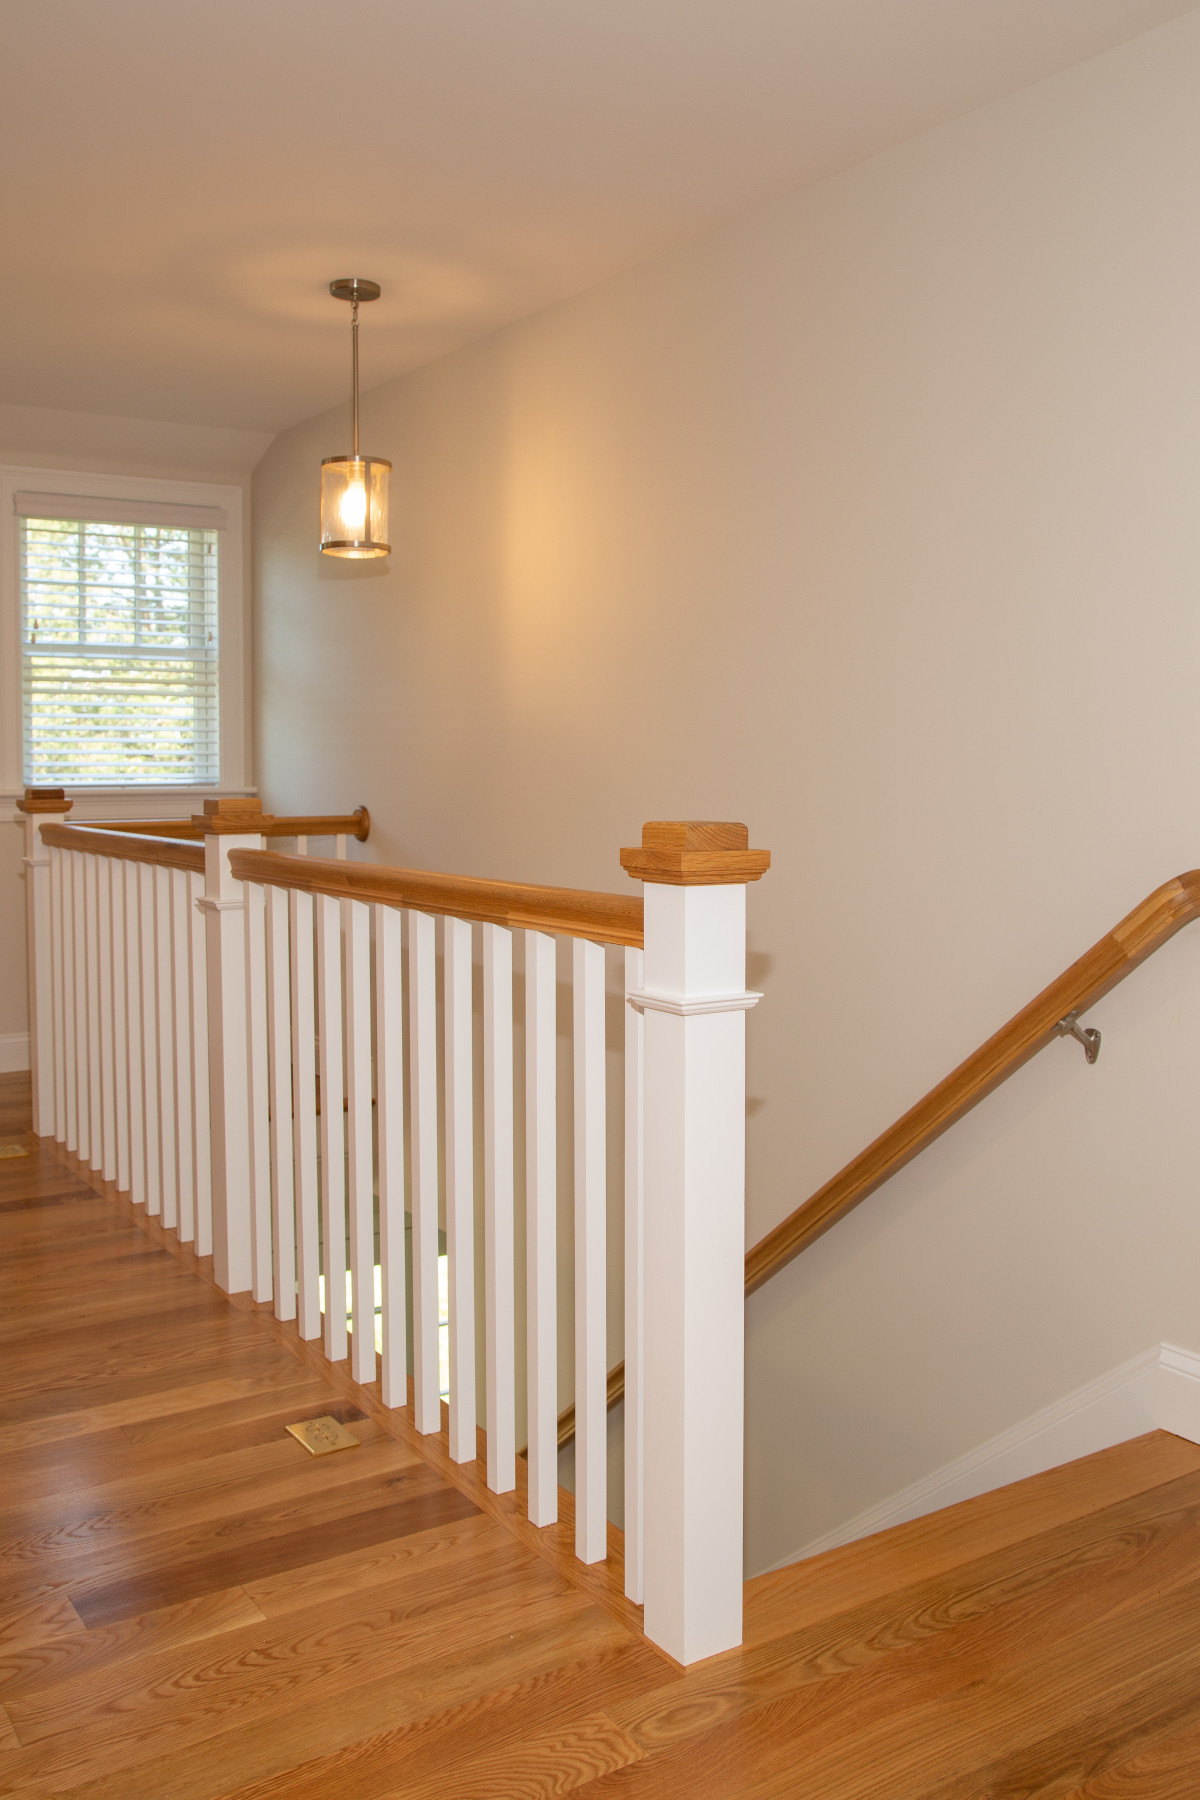 View of stairway in new home from second floor